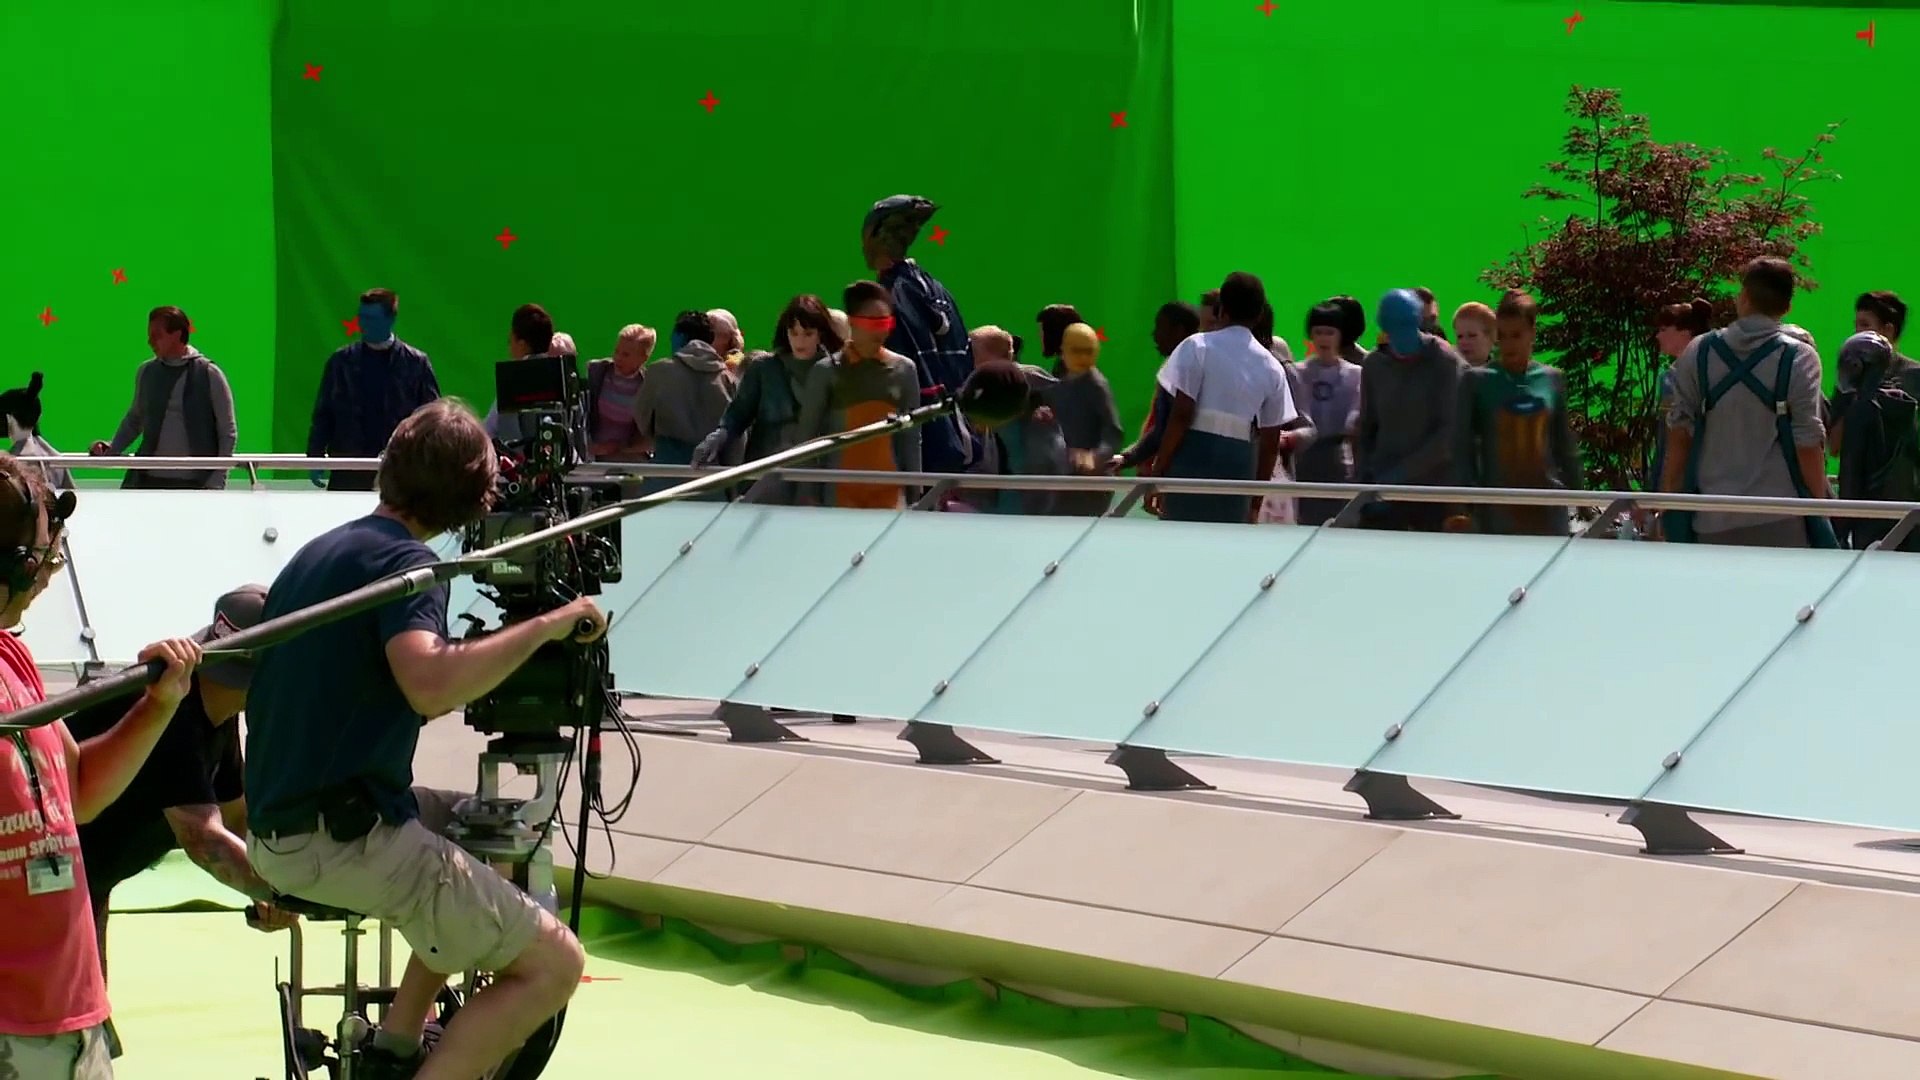 #2 Behind the Scenes of GUARDIANS OF THE GALAXY